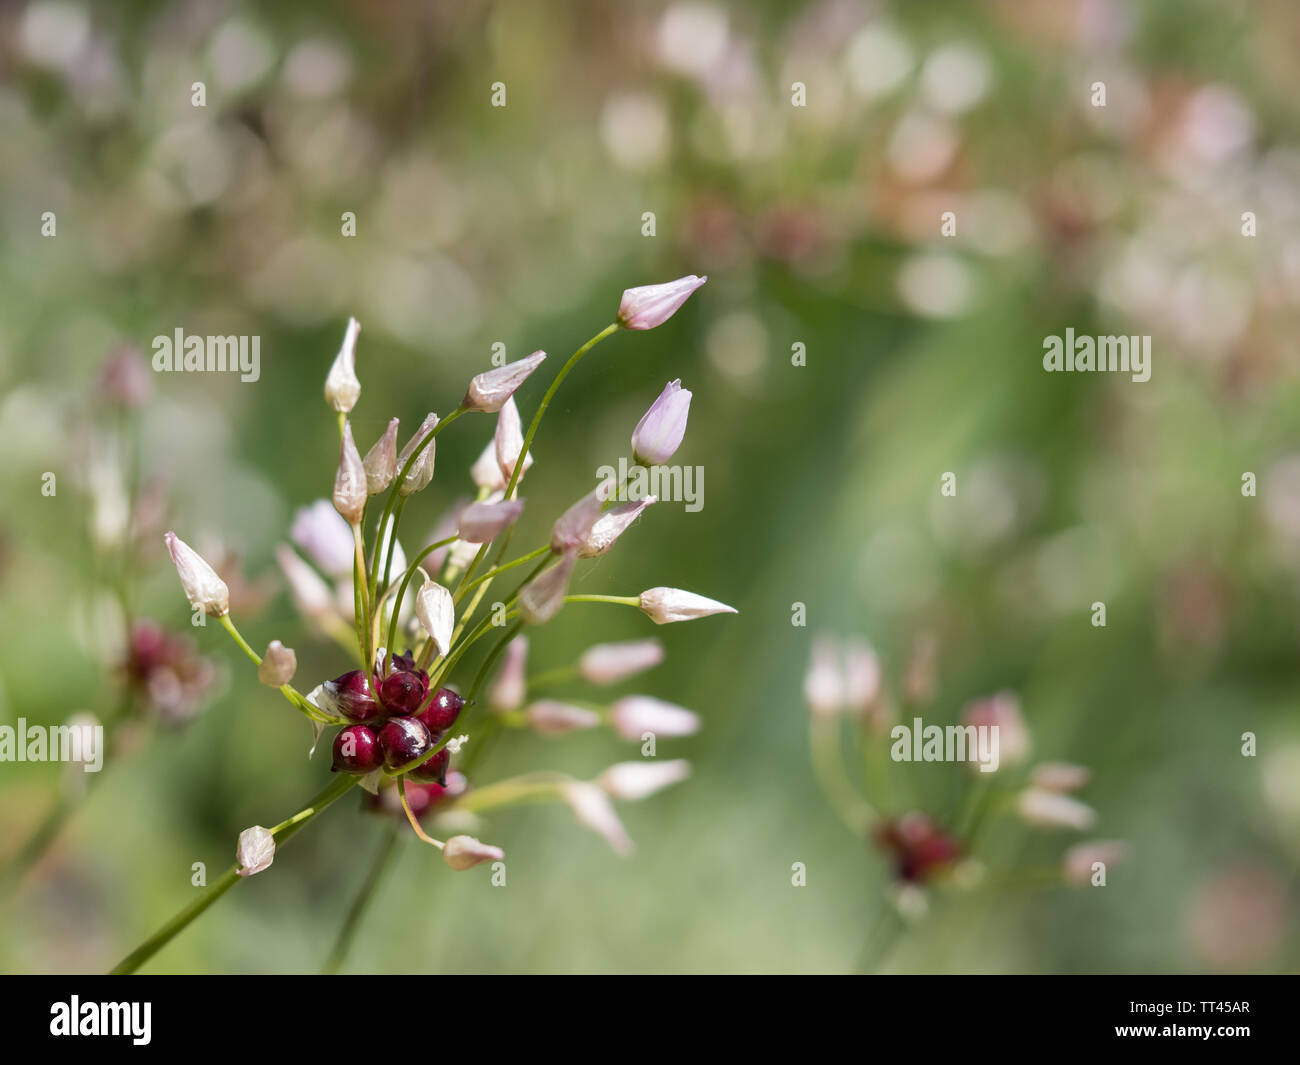 a close up detail view of allium oleraceum wild field garlic onion in flower flowering with bokeh background Stock Photo